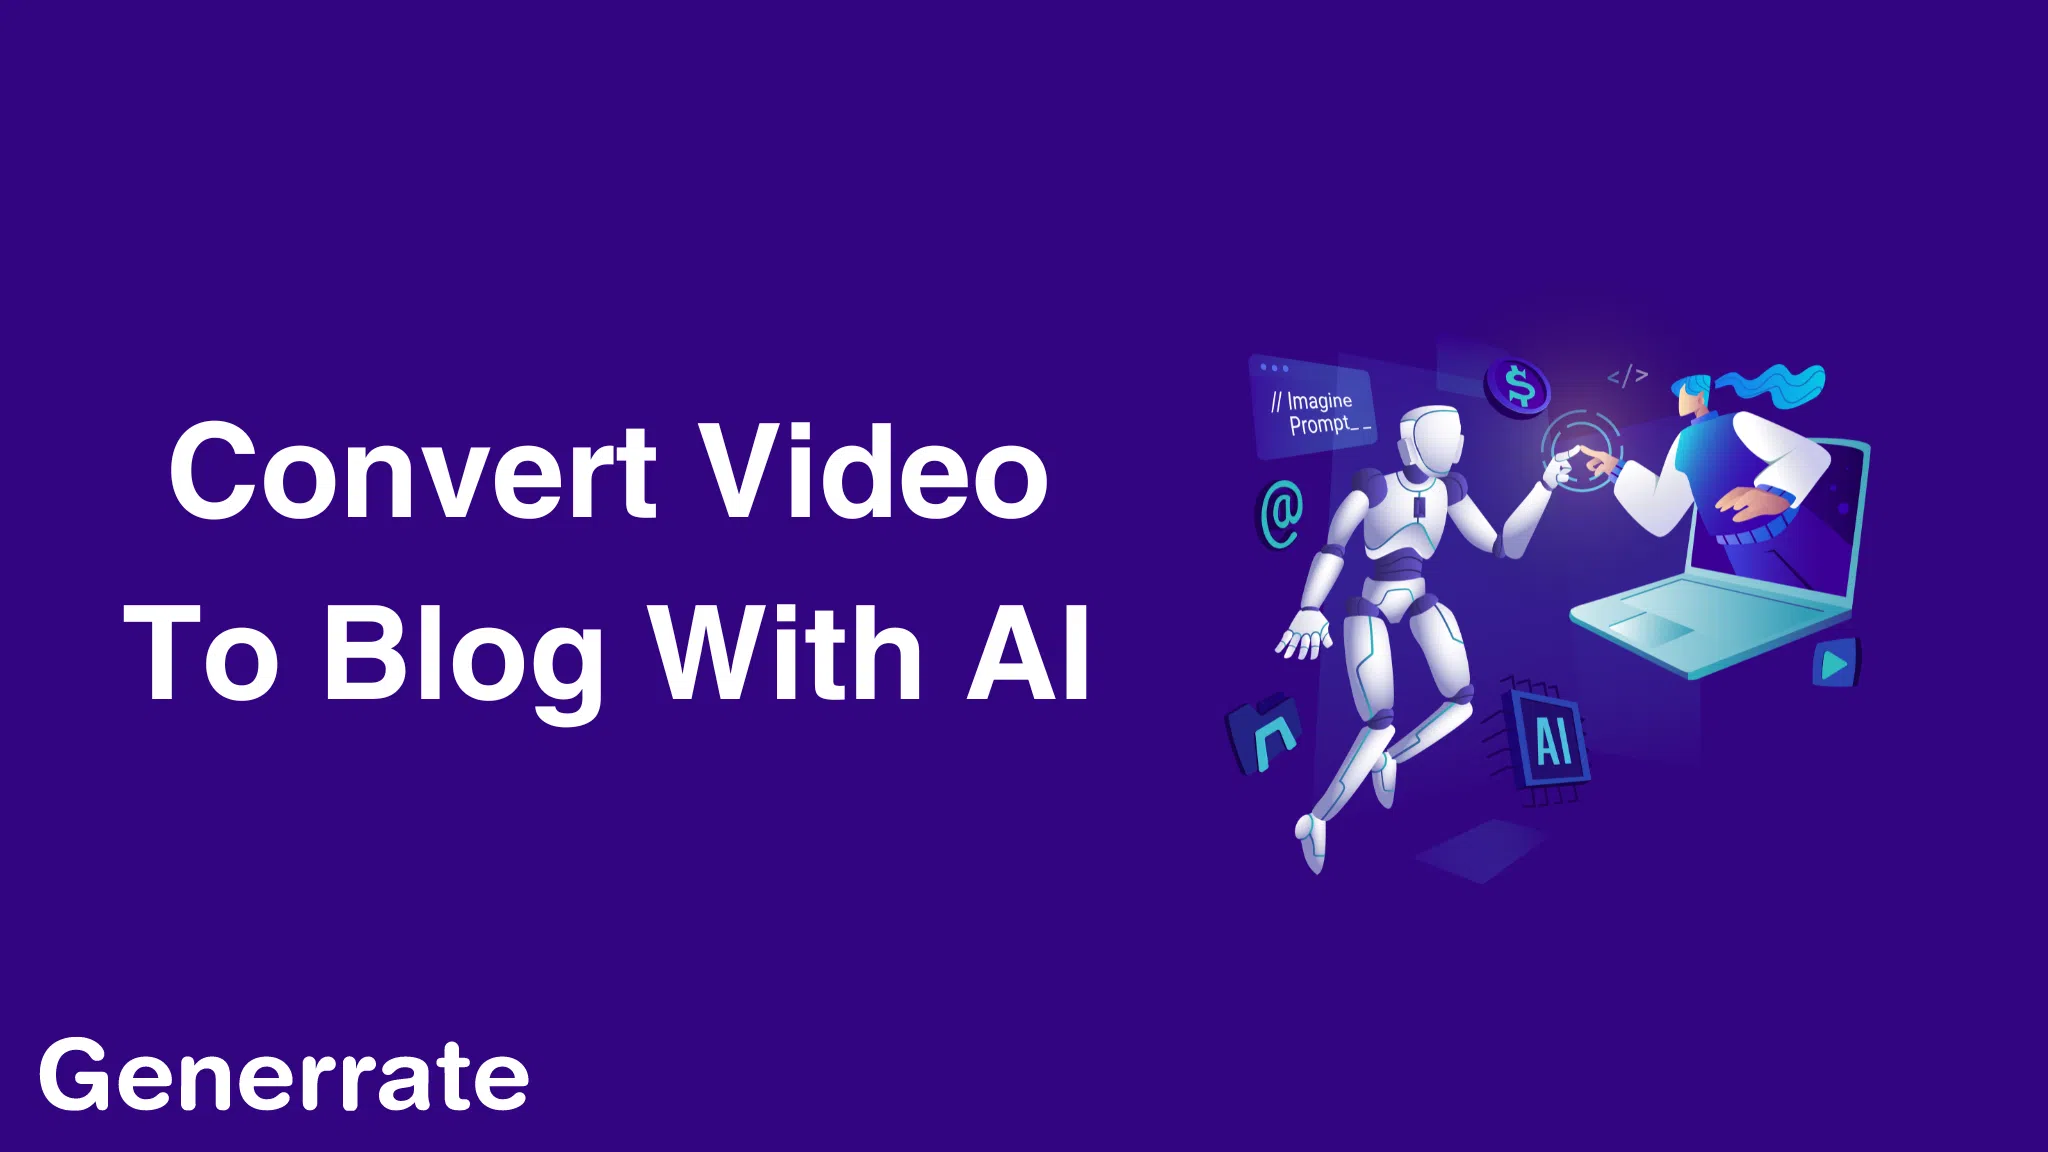 Video to blog with AI